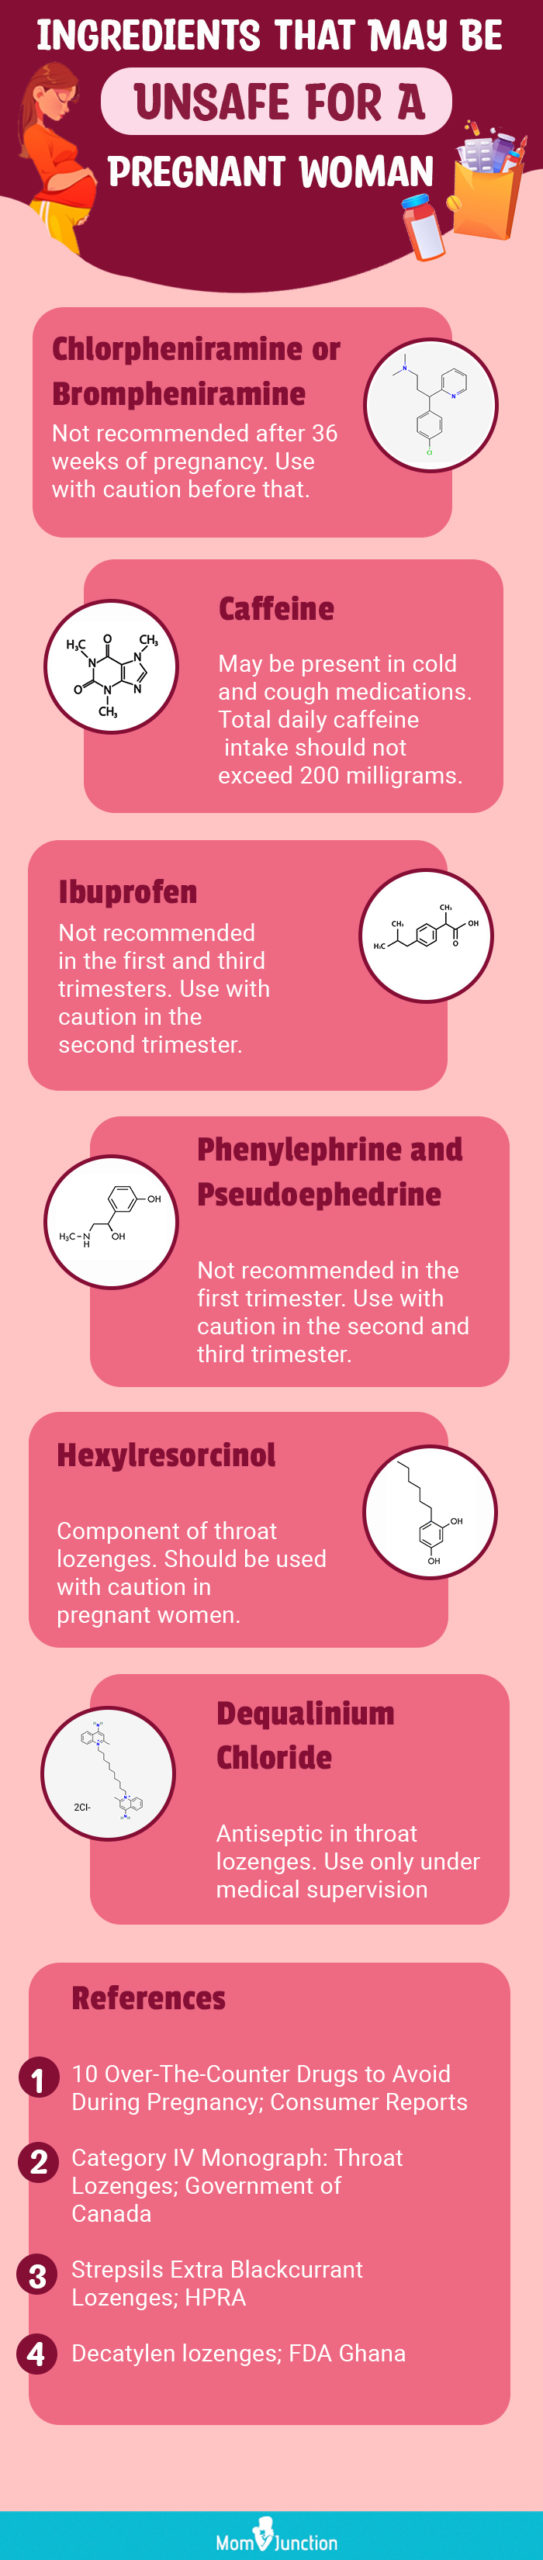 ingredients that may be unsafe for a pregnant woman (infographic)